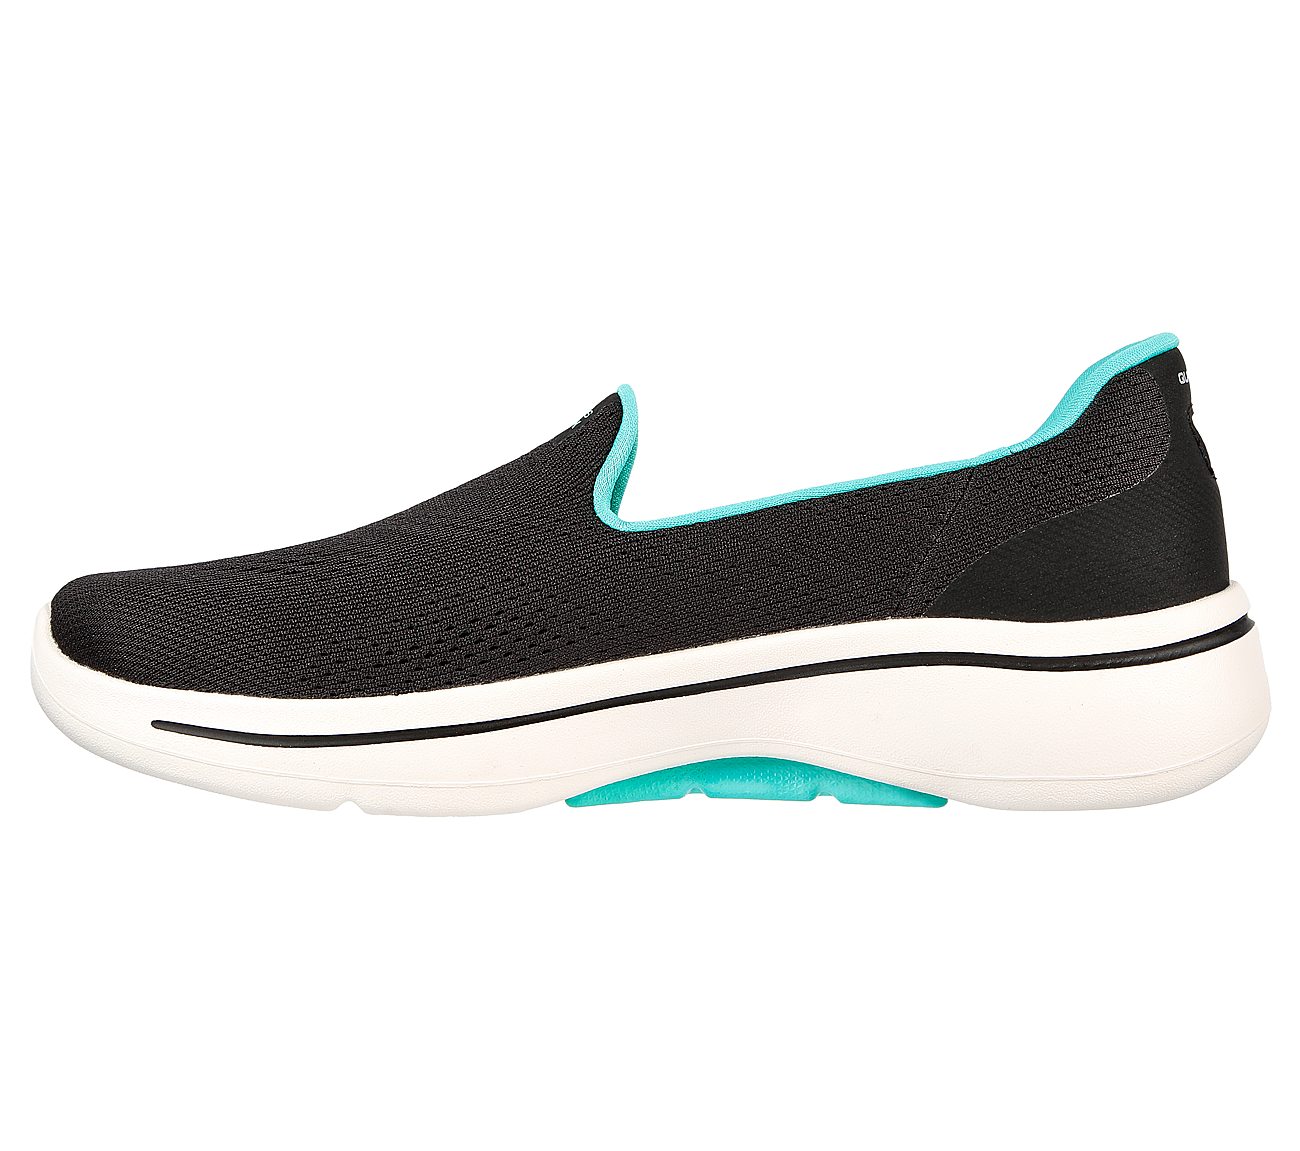 Skechers Black/Turquoise Go Walk Arch Fit Imagined Womens Slip On Shoes ...